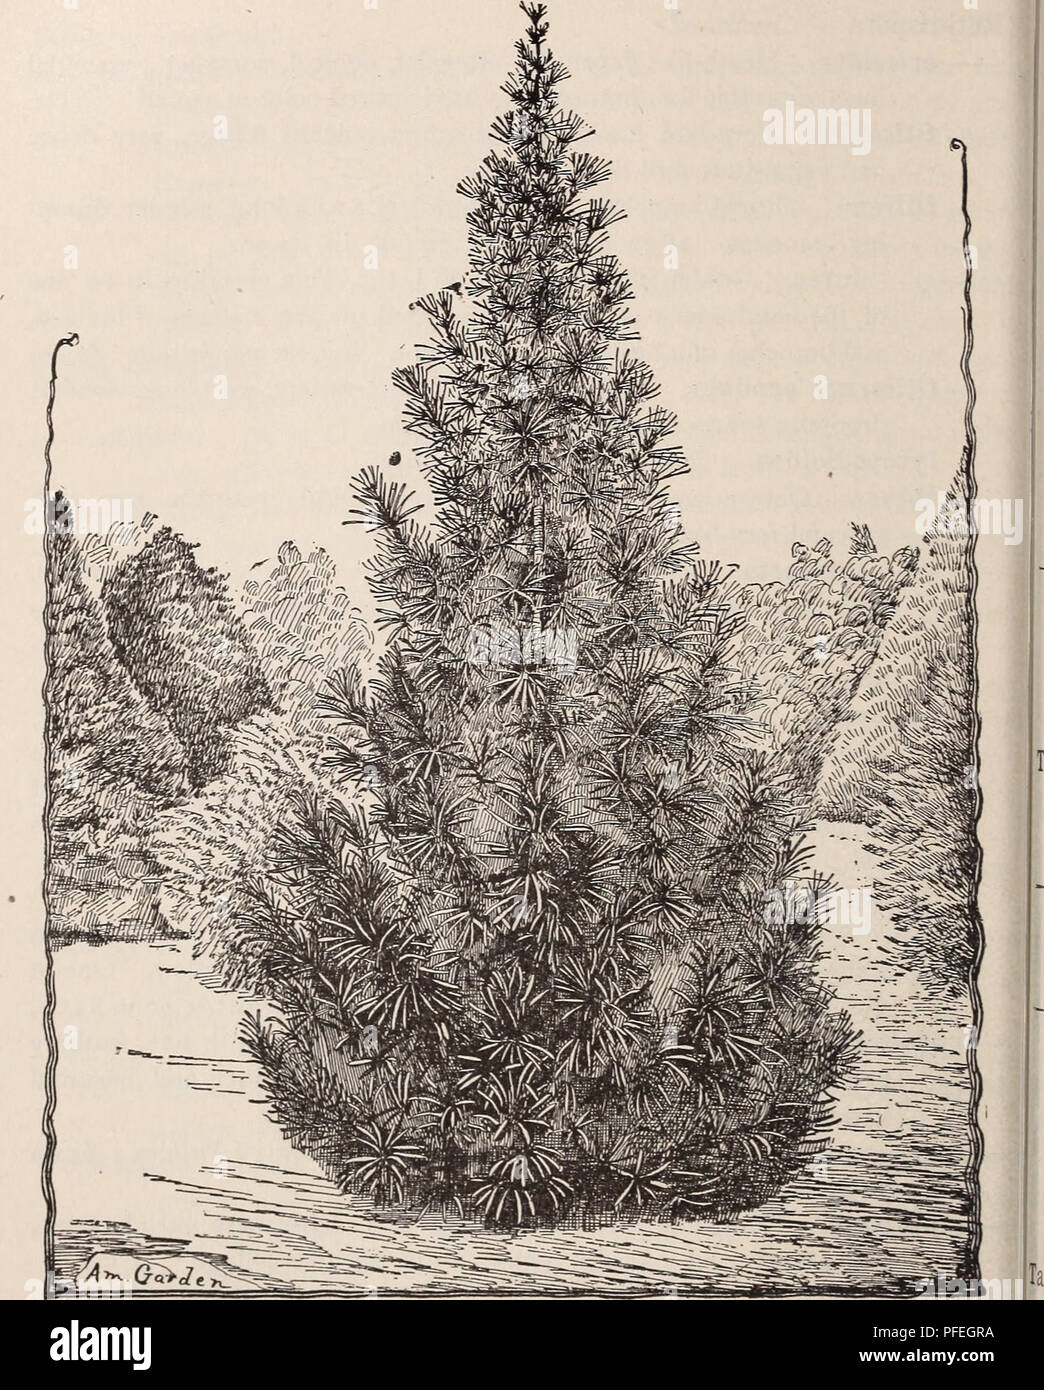 . Descriptive catalogue of trees, shrubs, vines and plants of the Shady Hill Nurseries. Nurseries (Horticulture) Massachusetts Cambridge Catalogs; Trees Seedlings Catalogs; Fruit trees Seedlings Catalogs; Flowers Catalogs. 74. SCIADOPITYS VERTICILLATA. Sciadopitys verticillata. Umbrella Pine. Perfectly upright trunk with horizontal branches, bearing whorls of shining green, very broad, flat needles, lined with white on the under side. These needles, by their remarkable size, and still more remarkable arrangement in umbrella- like tufts, and their leathery texture, give this tree the most uniqu Stock Photo